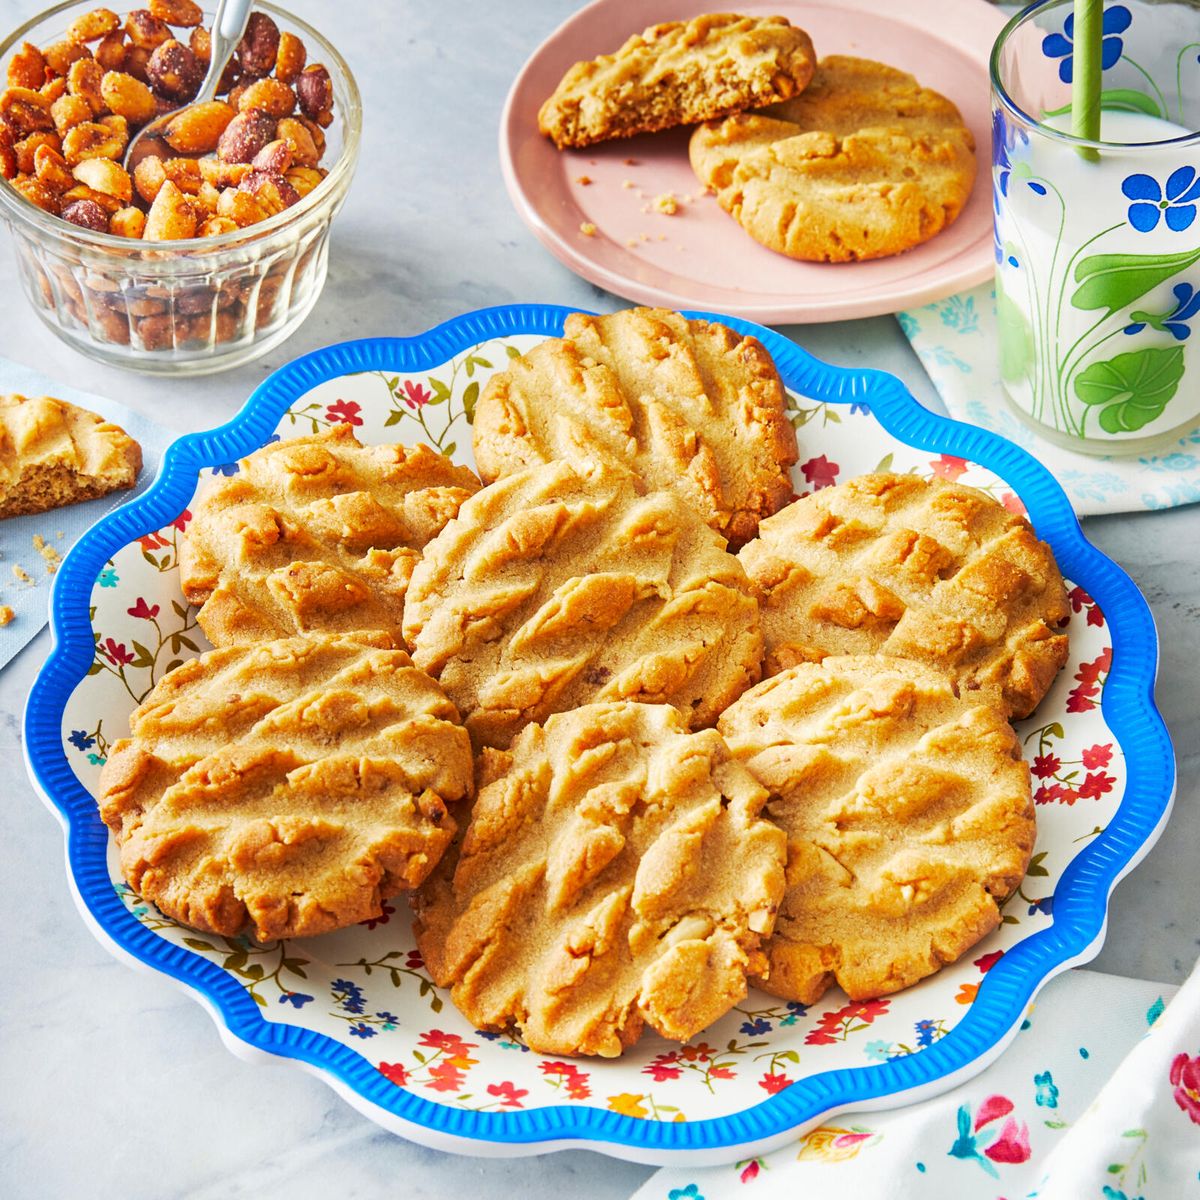 the pioneer woman's peanut butter cookie recipe